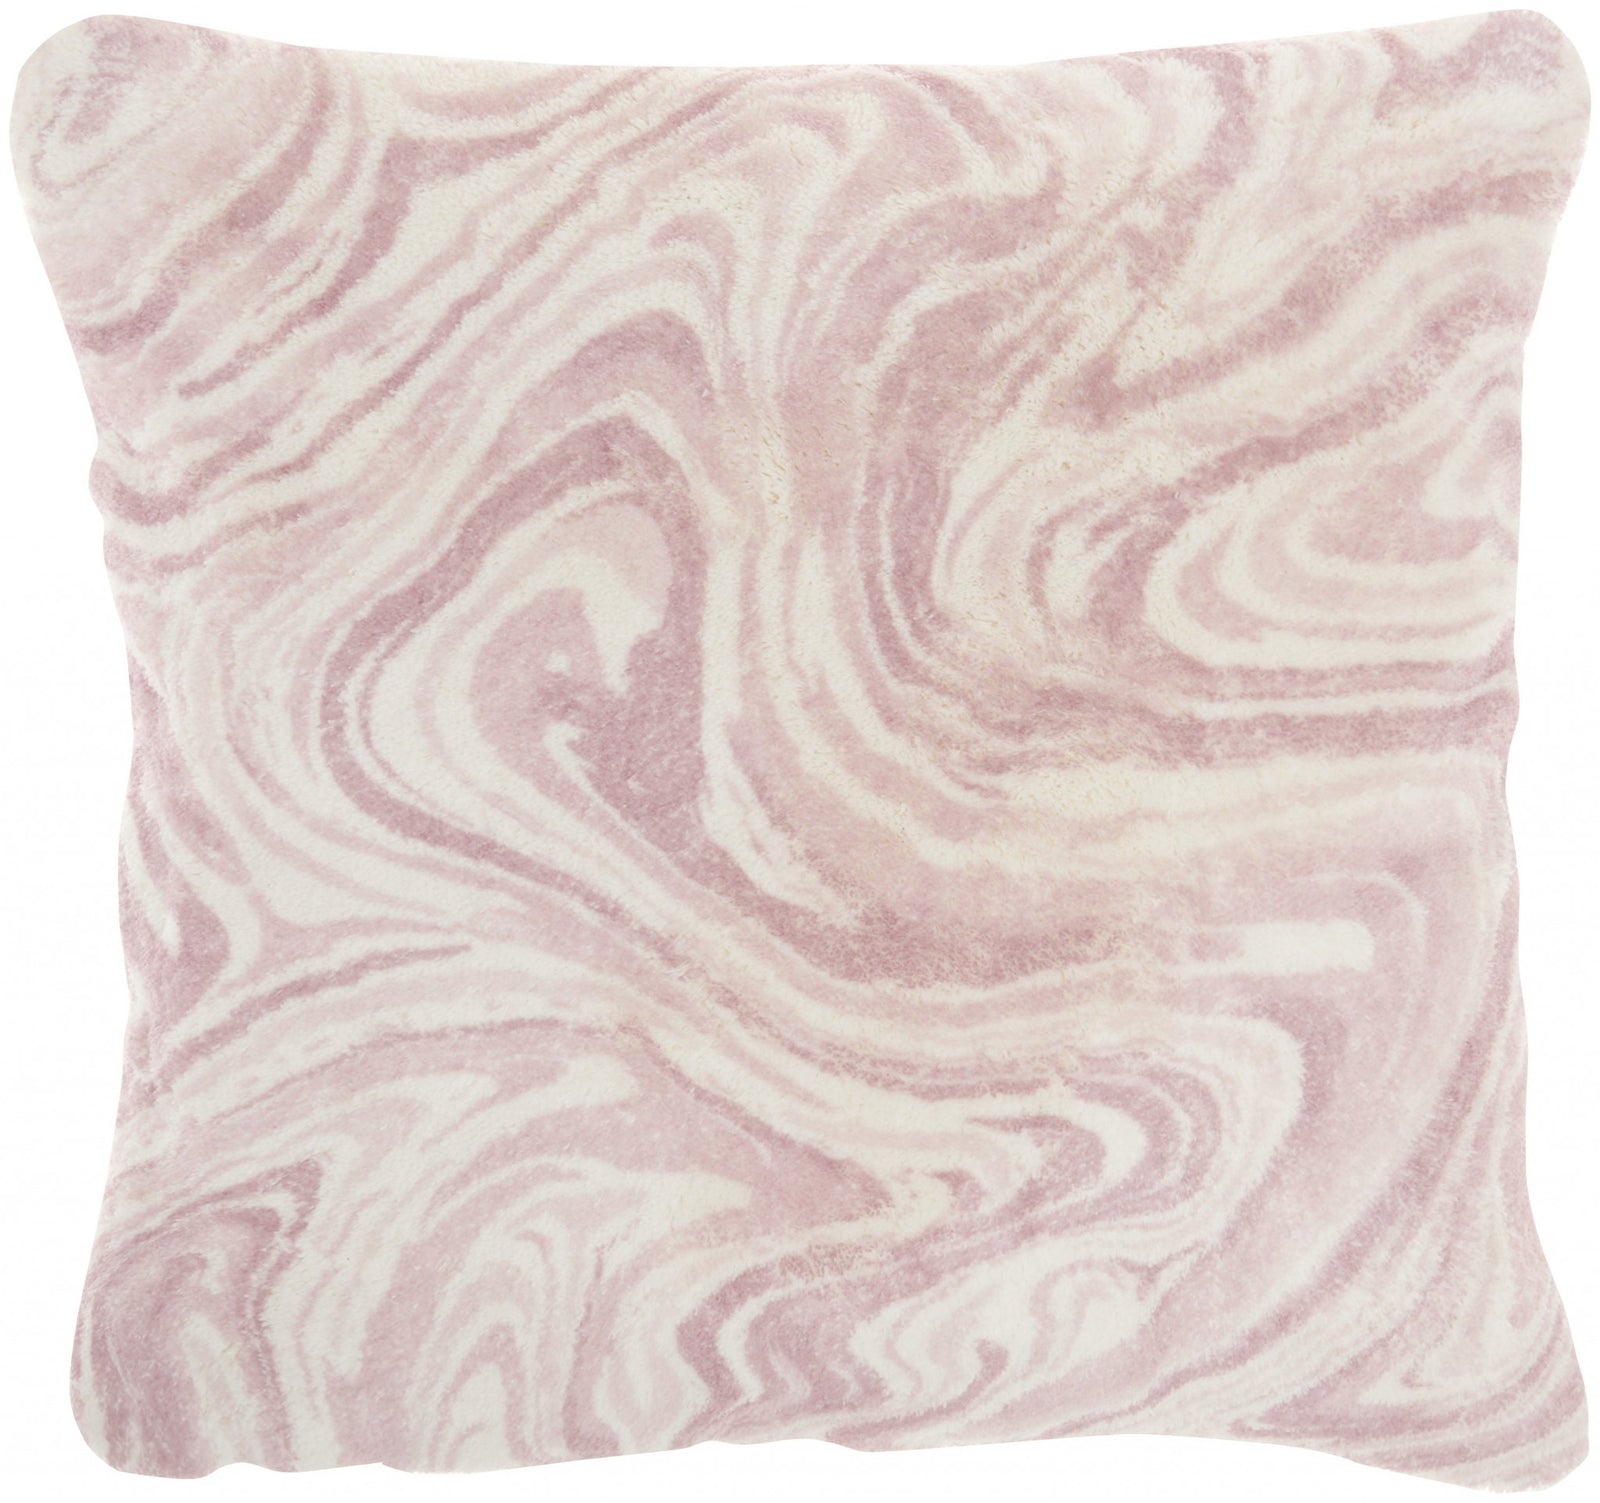 Pink Marbled Patterned Throw Pillow